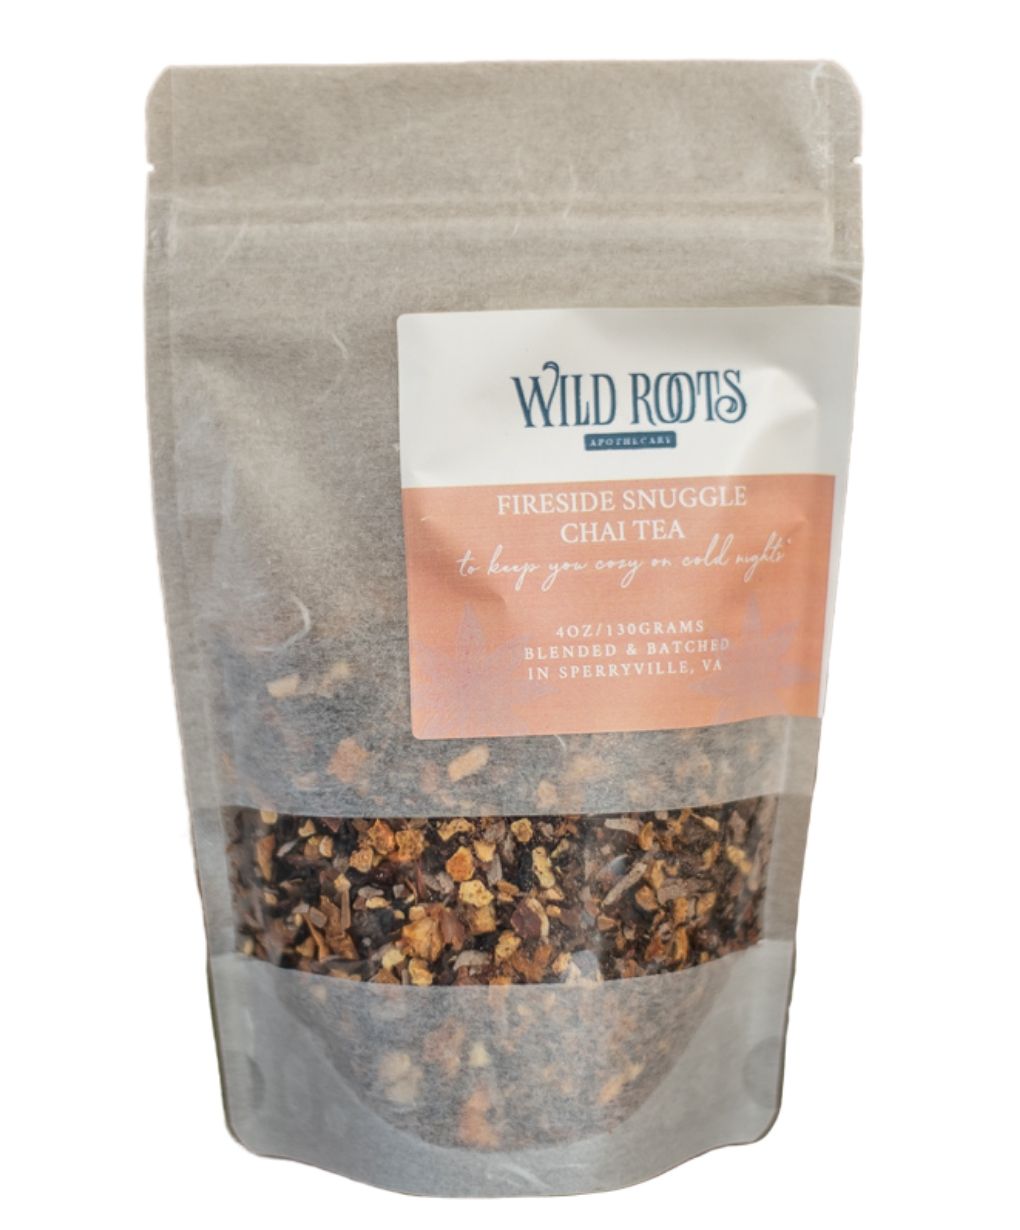 Fireside Snuggle Chai Tea—Wild Roots Apothecary